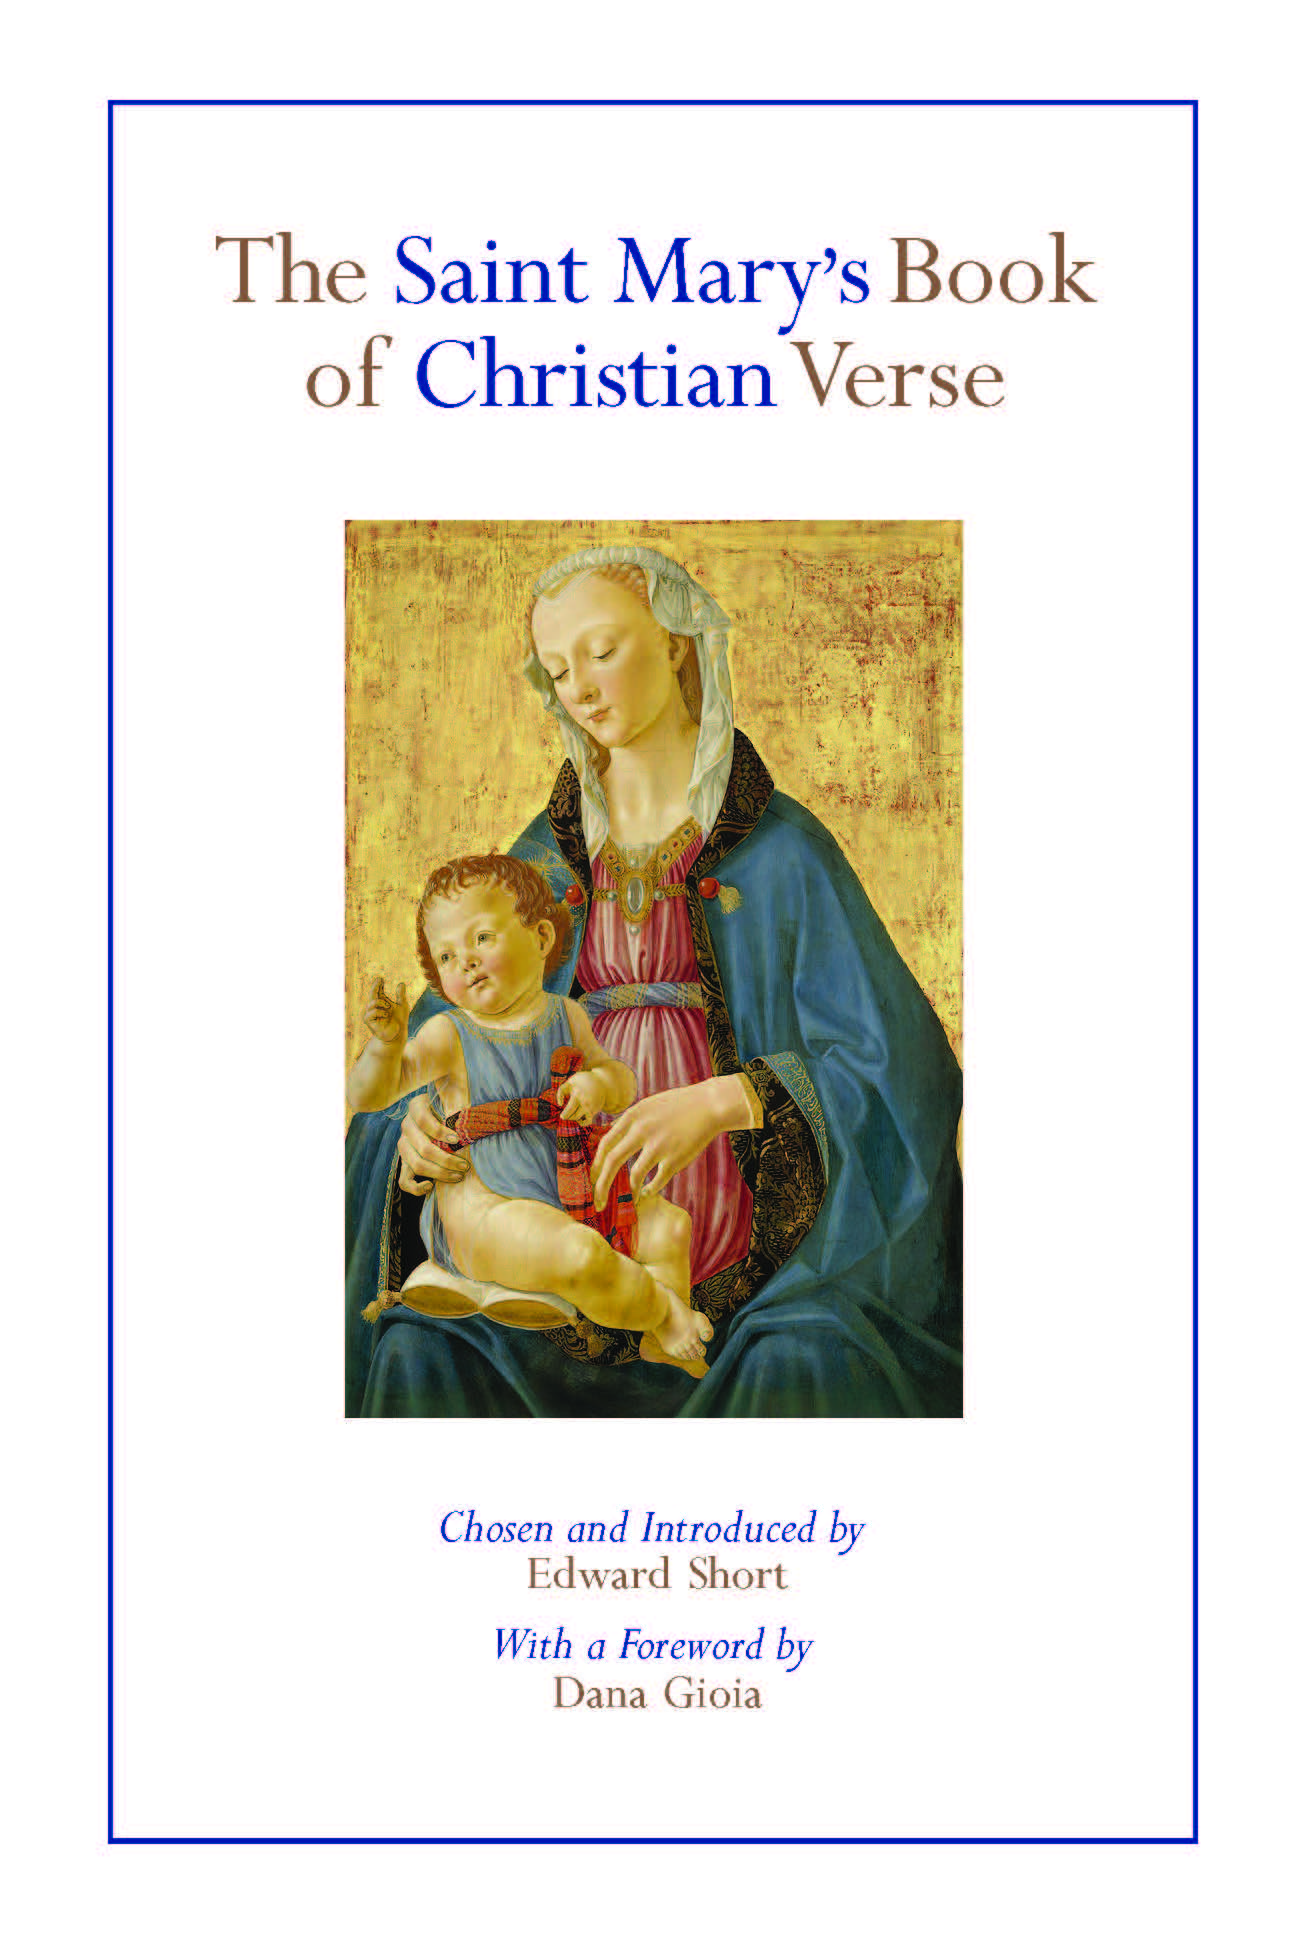 St Mary's Book of Christian Verse / Edward Short